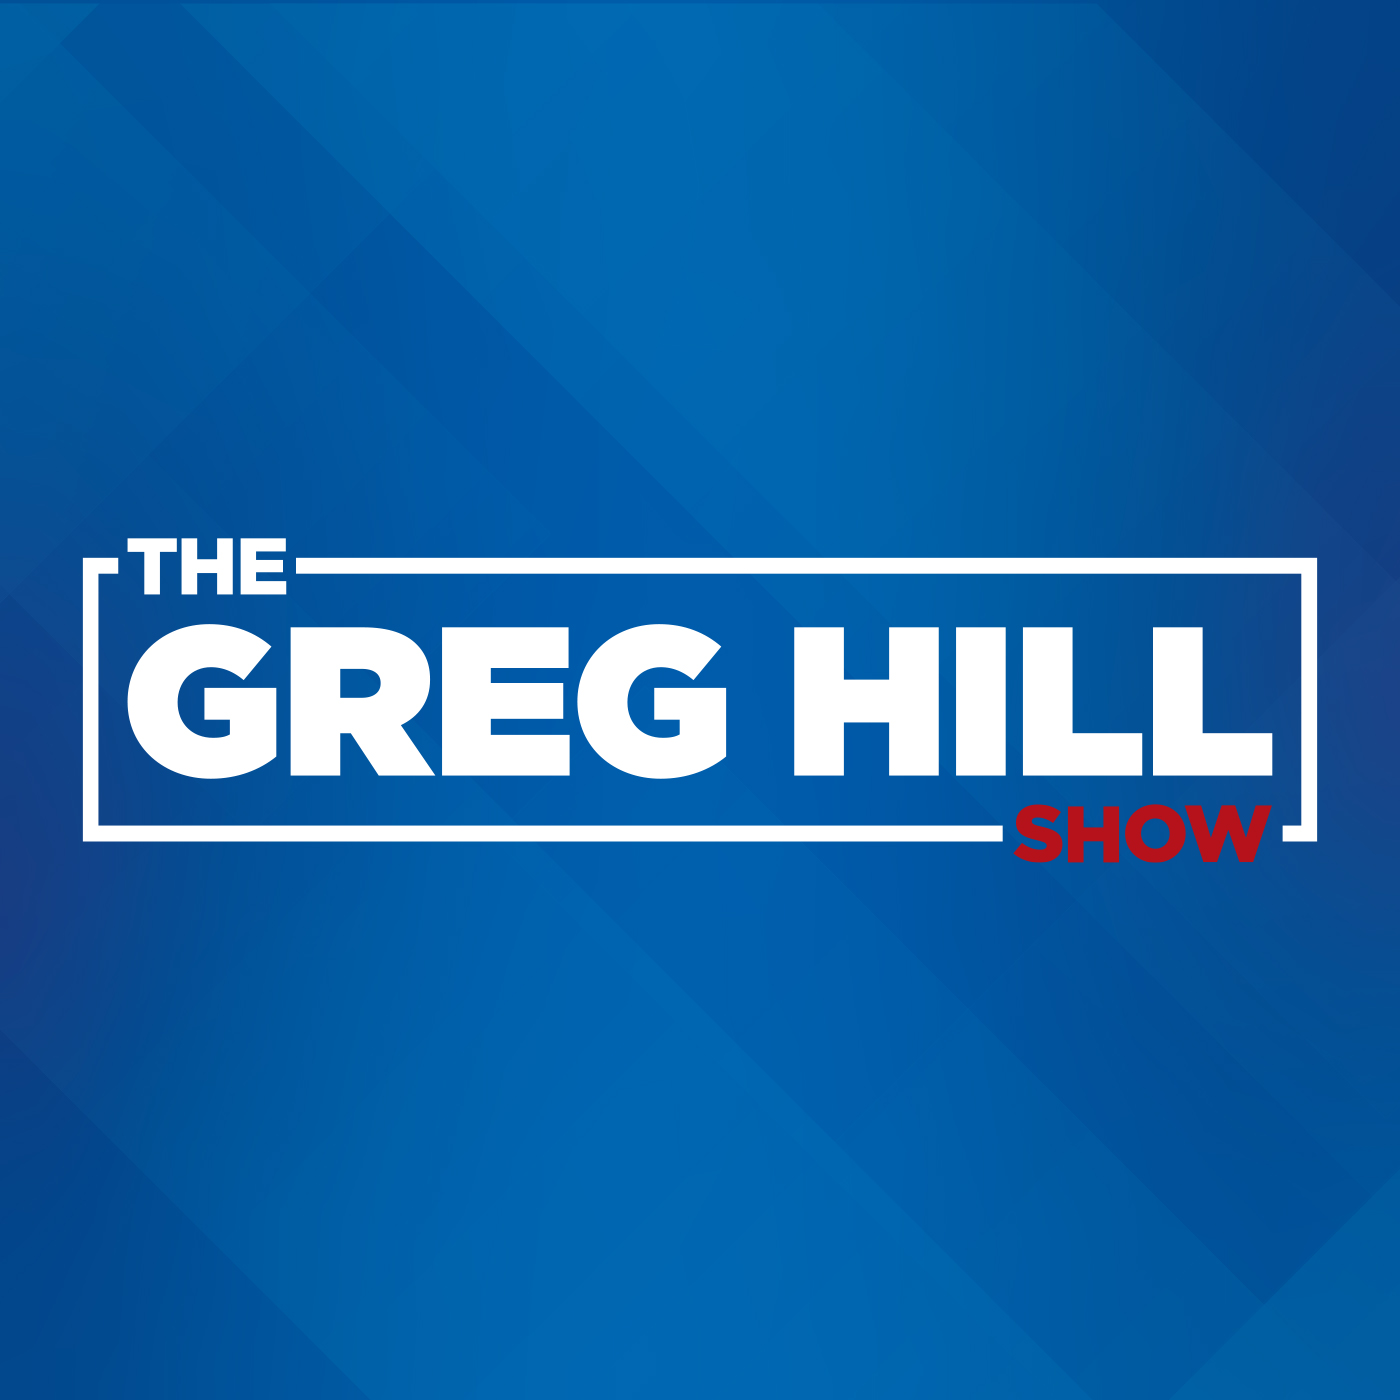 The Greg Hill Show - Tuesday